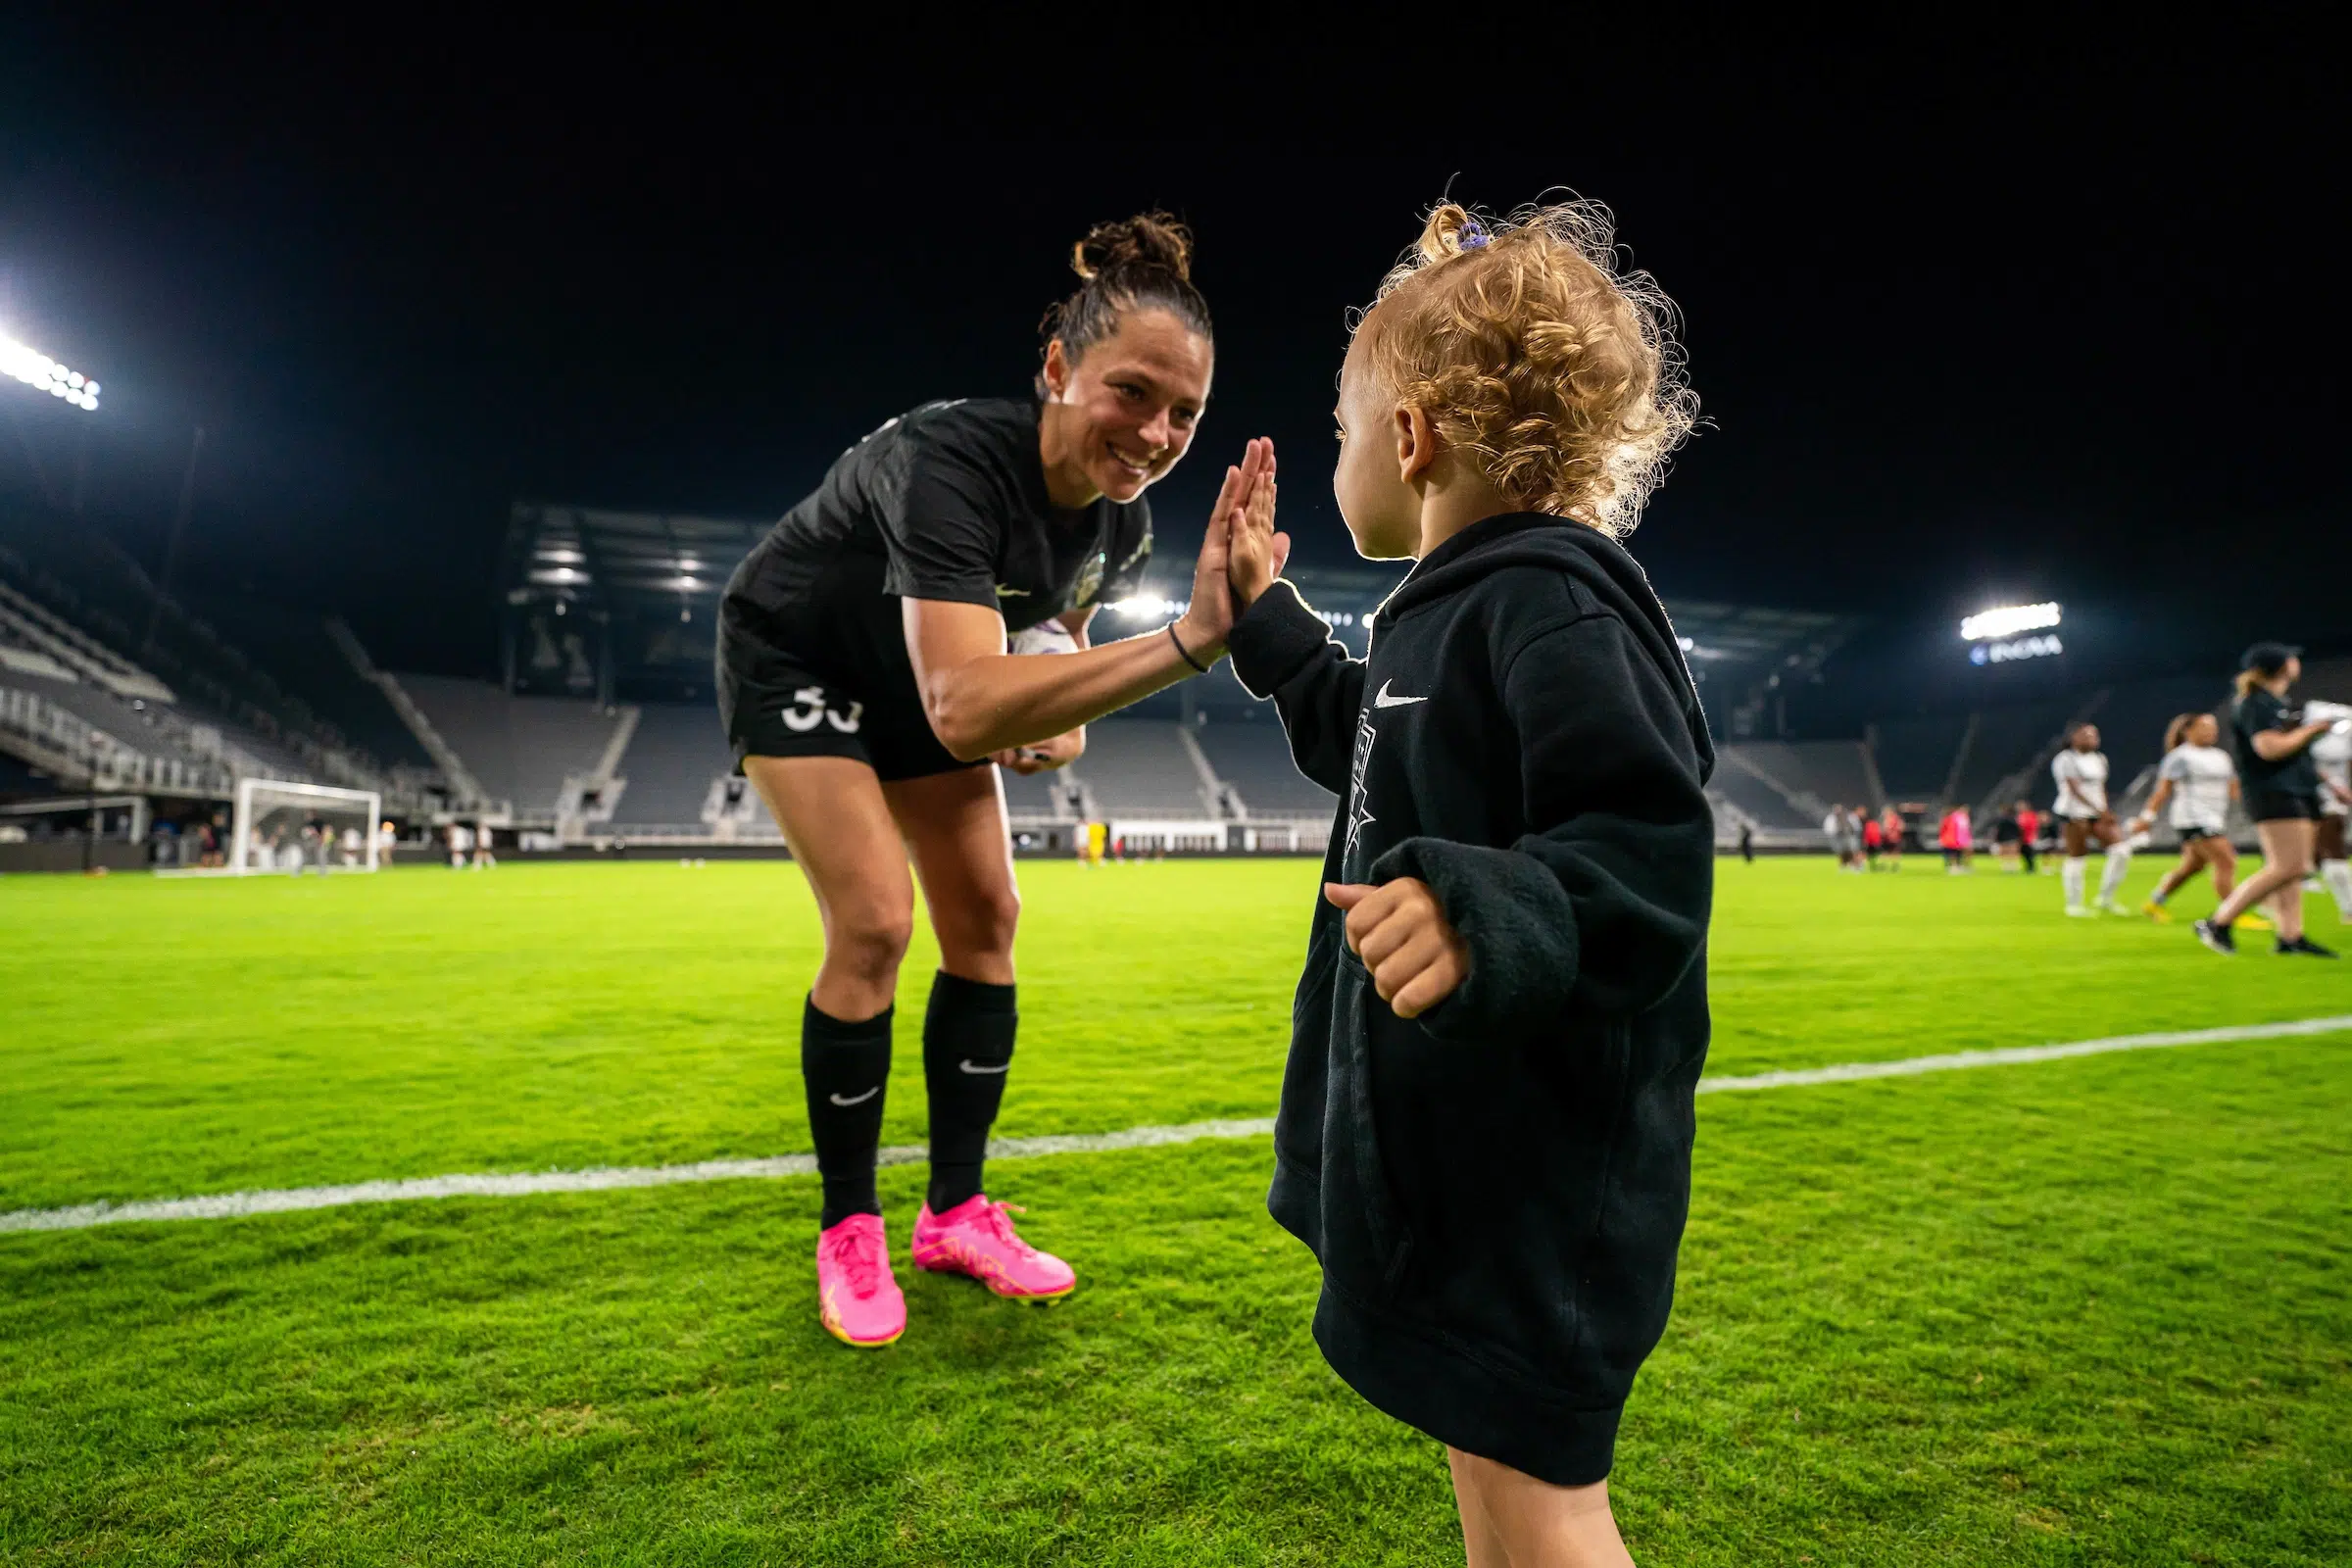 Ashley Hatch in a black uniform and pink cleats bends down to high five a toddler fan who is wearing a black hoodie.